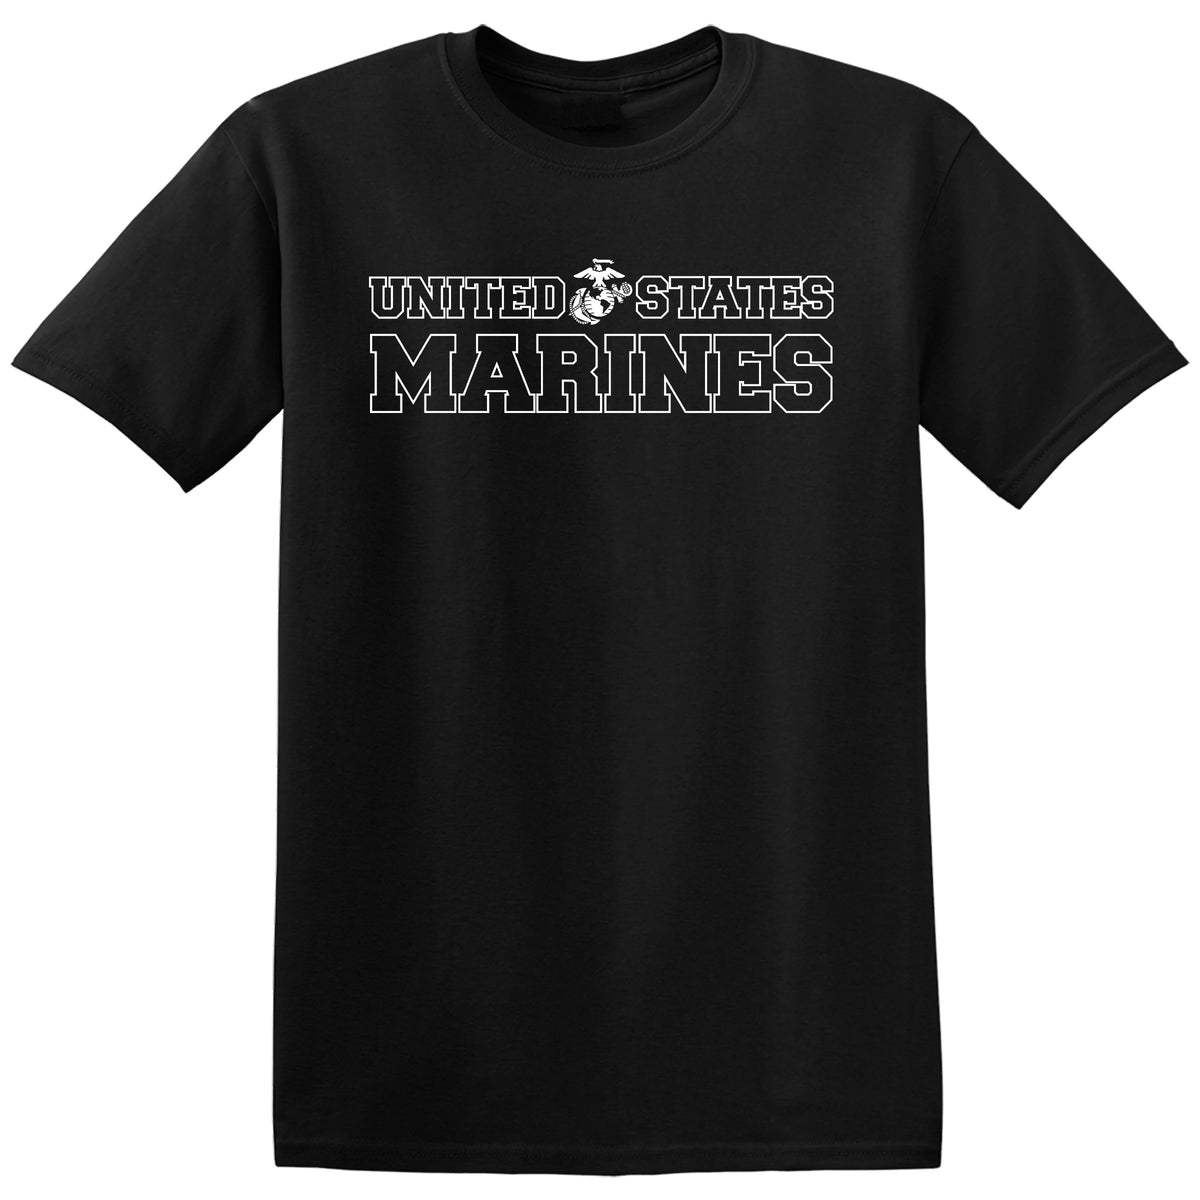 United States Marines Outline T-Shirt